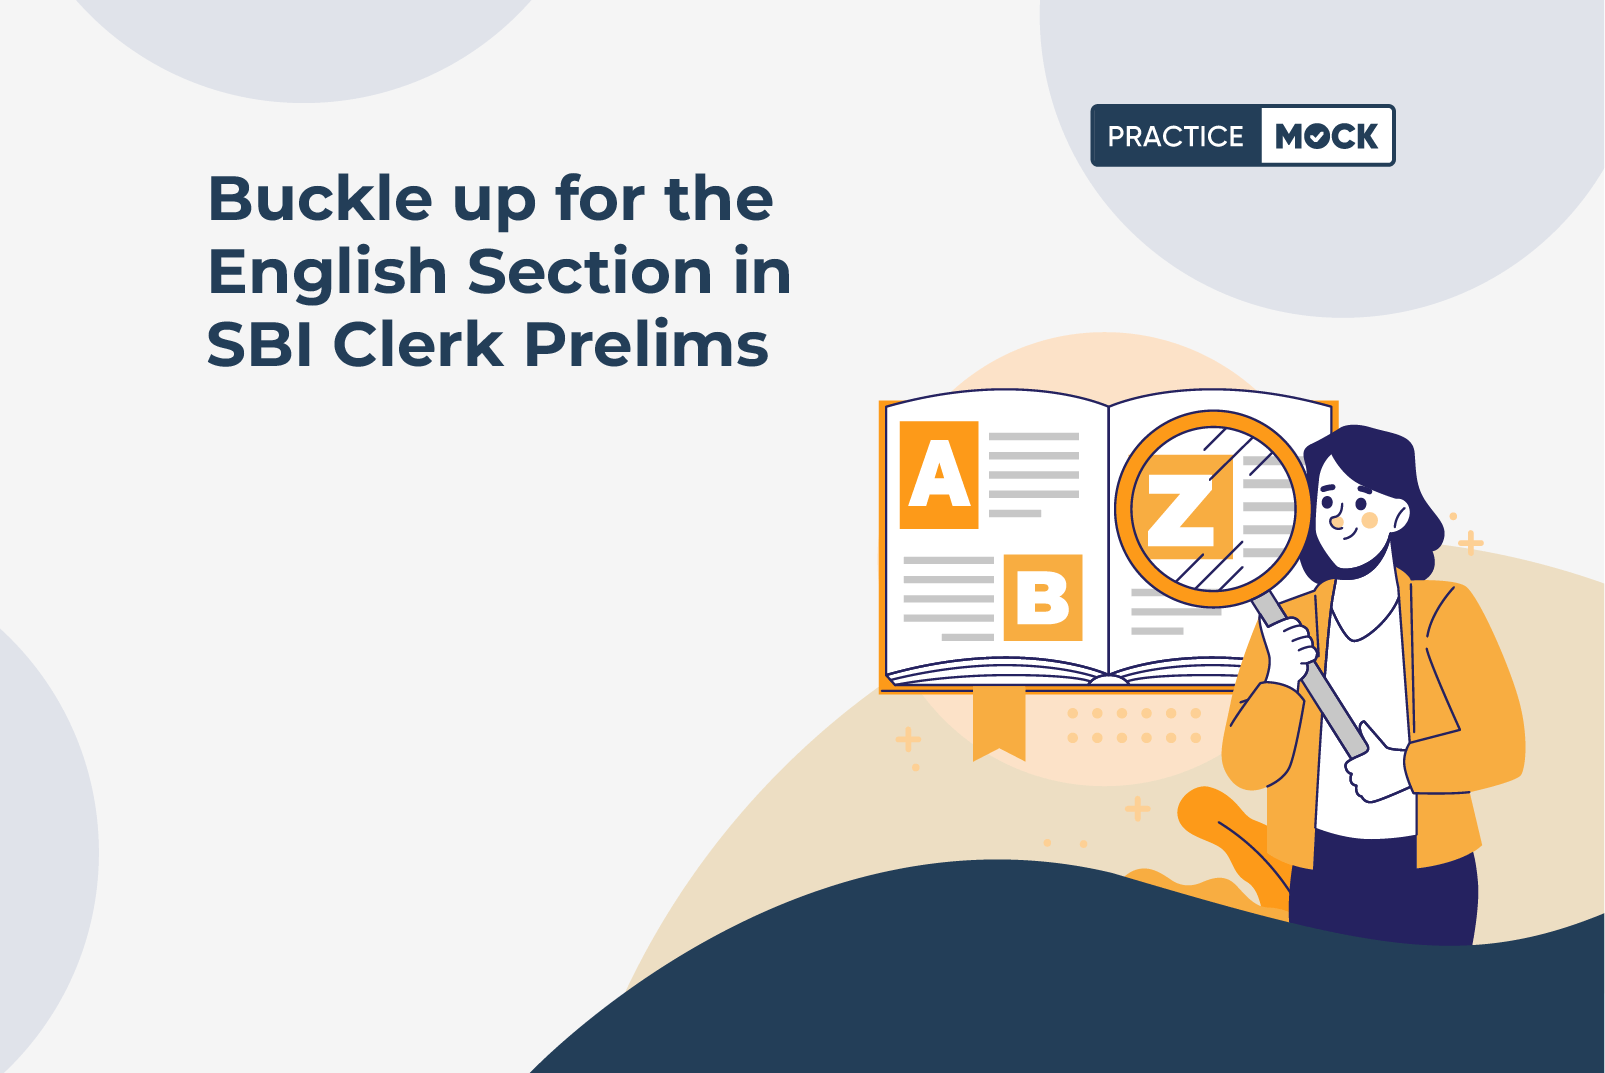 Buckle up for the English Section in SBI Clerk Prelims (1)